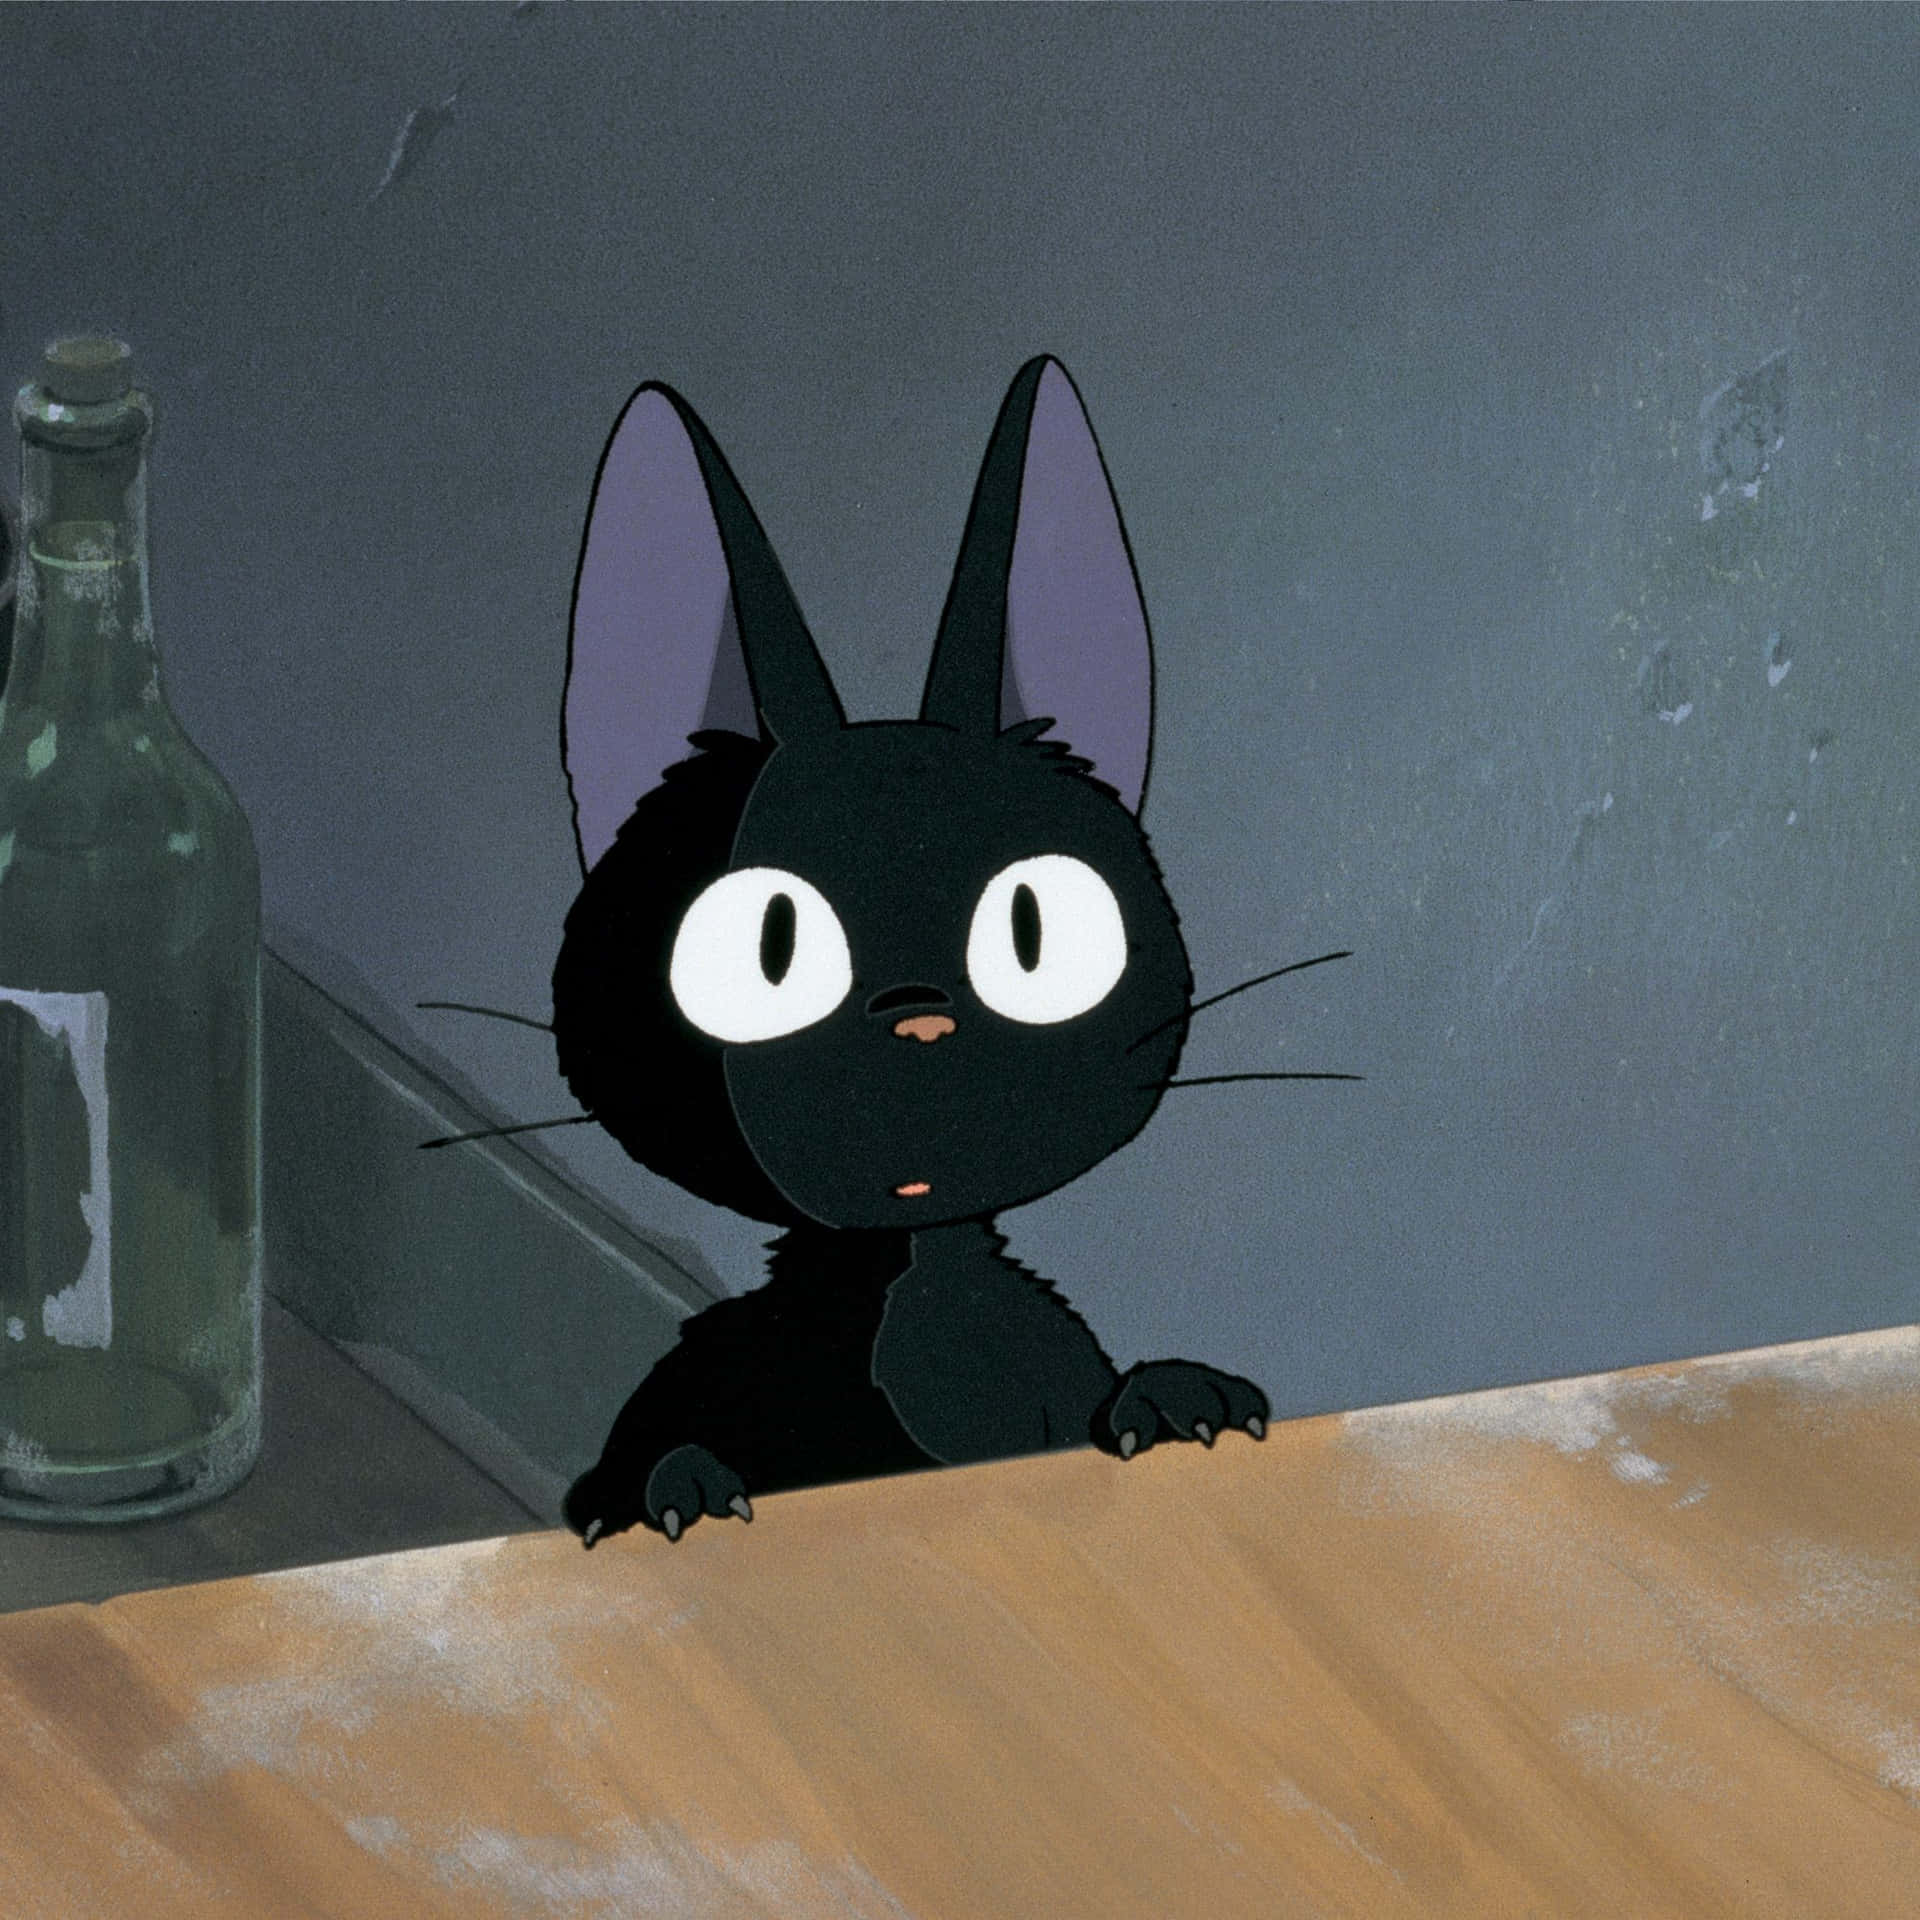 Jiji the black cat from Studio Ghibli's Kiki's Delivery Service sitting on a wooden branch Wallpaper